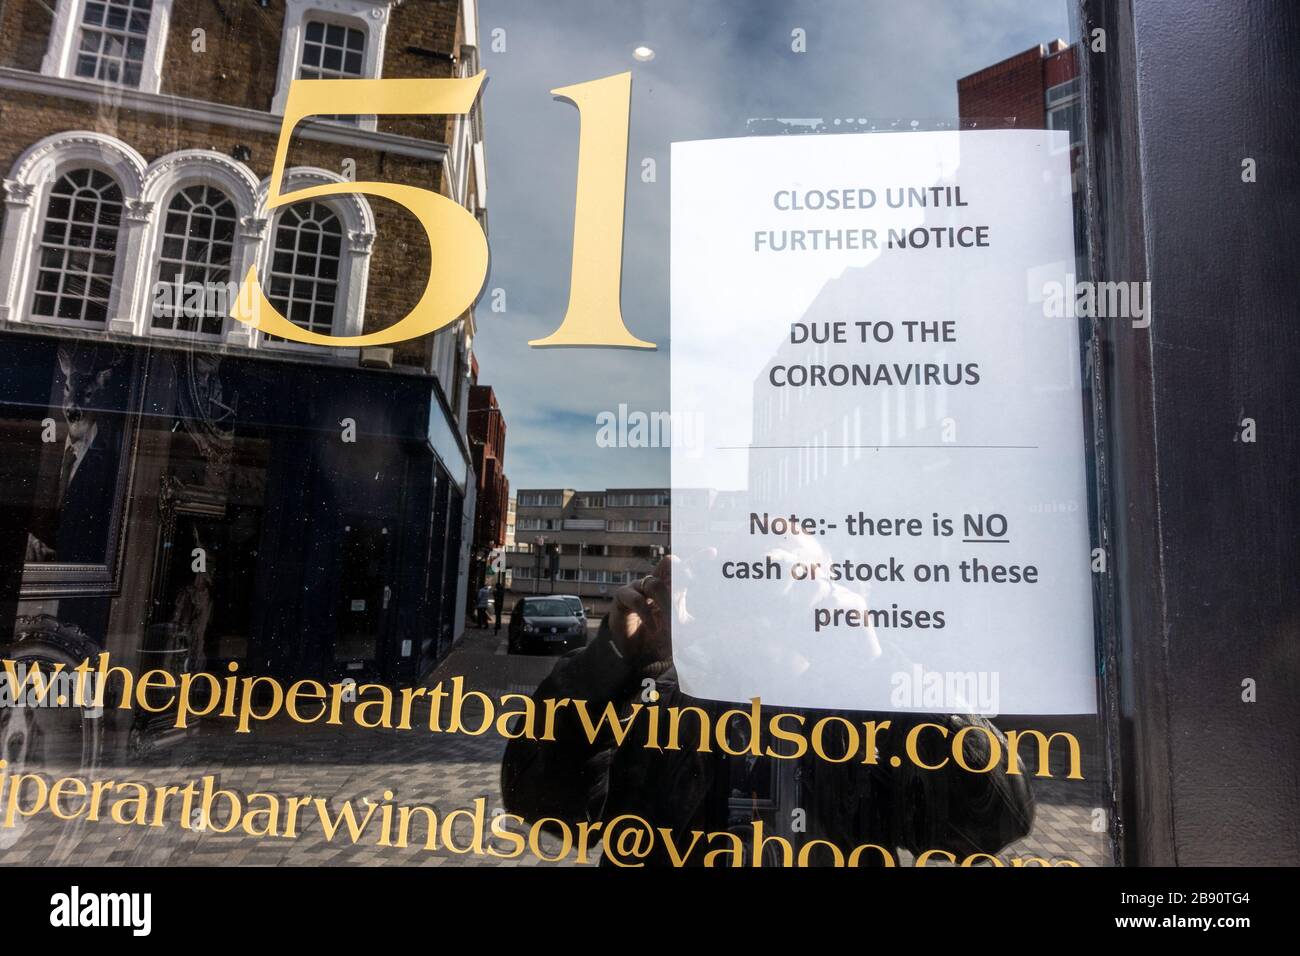 A notice in a pub in Windsor UK tells people that the pub is closed until further notice because of the coronavirus pandemic. Stock Photo